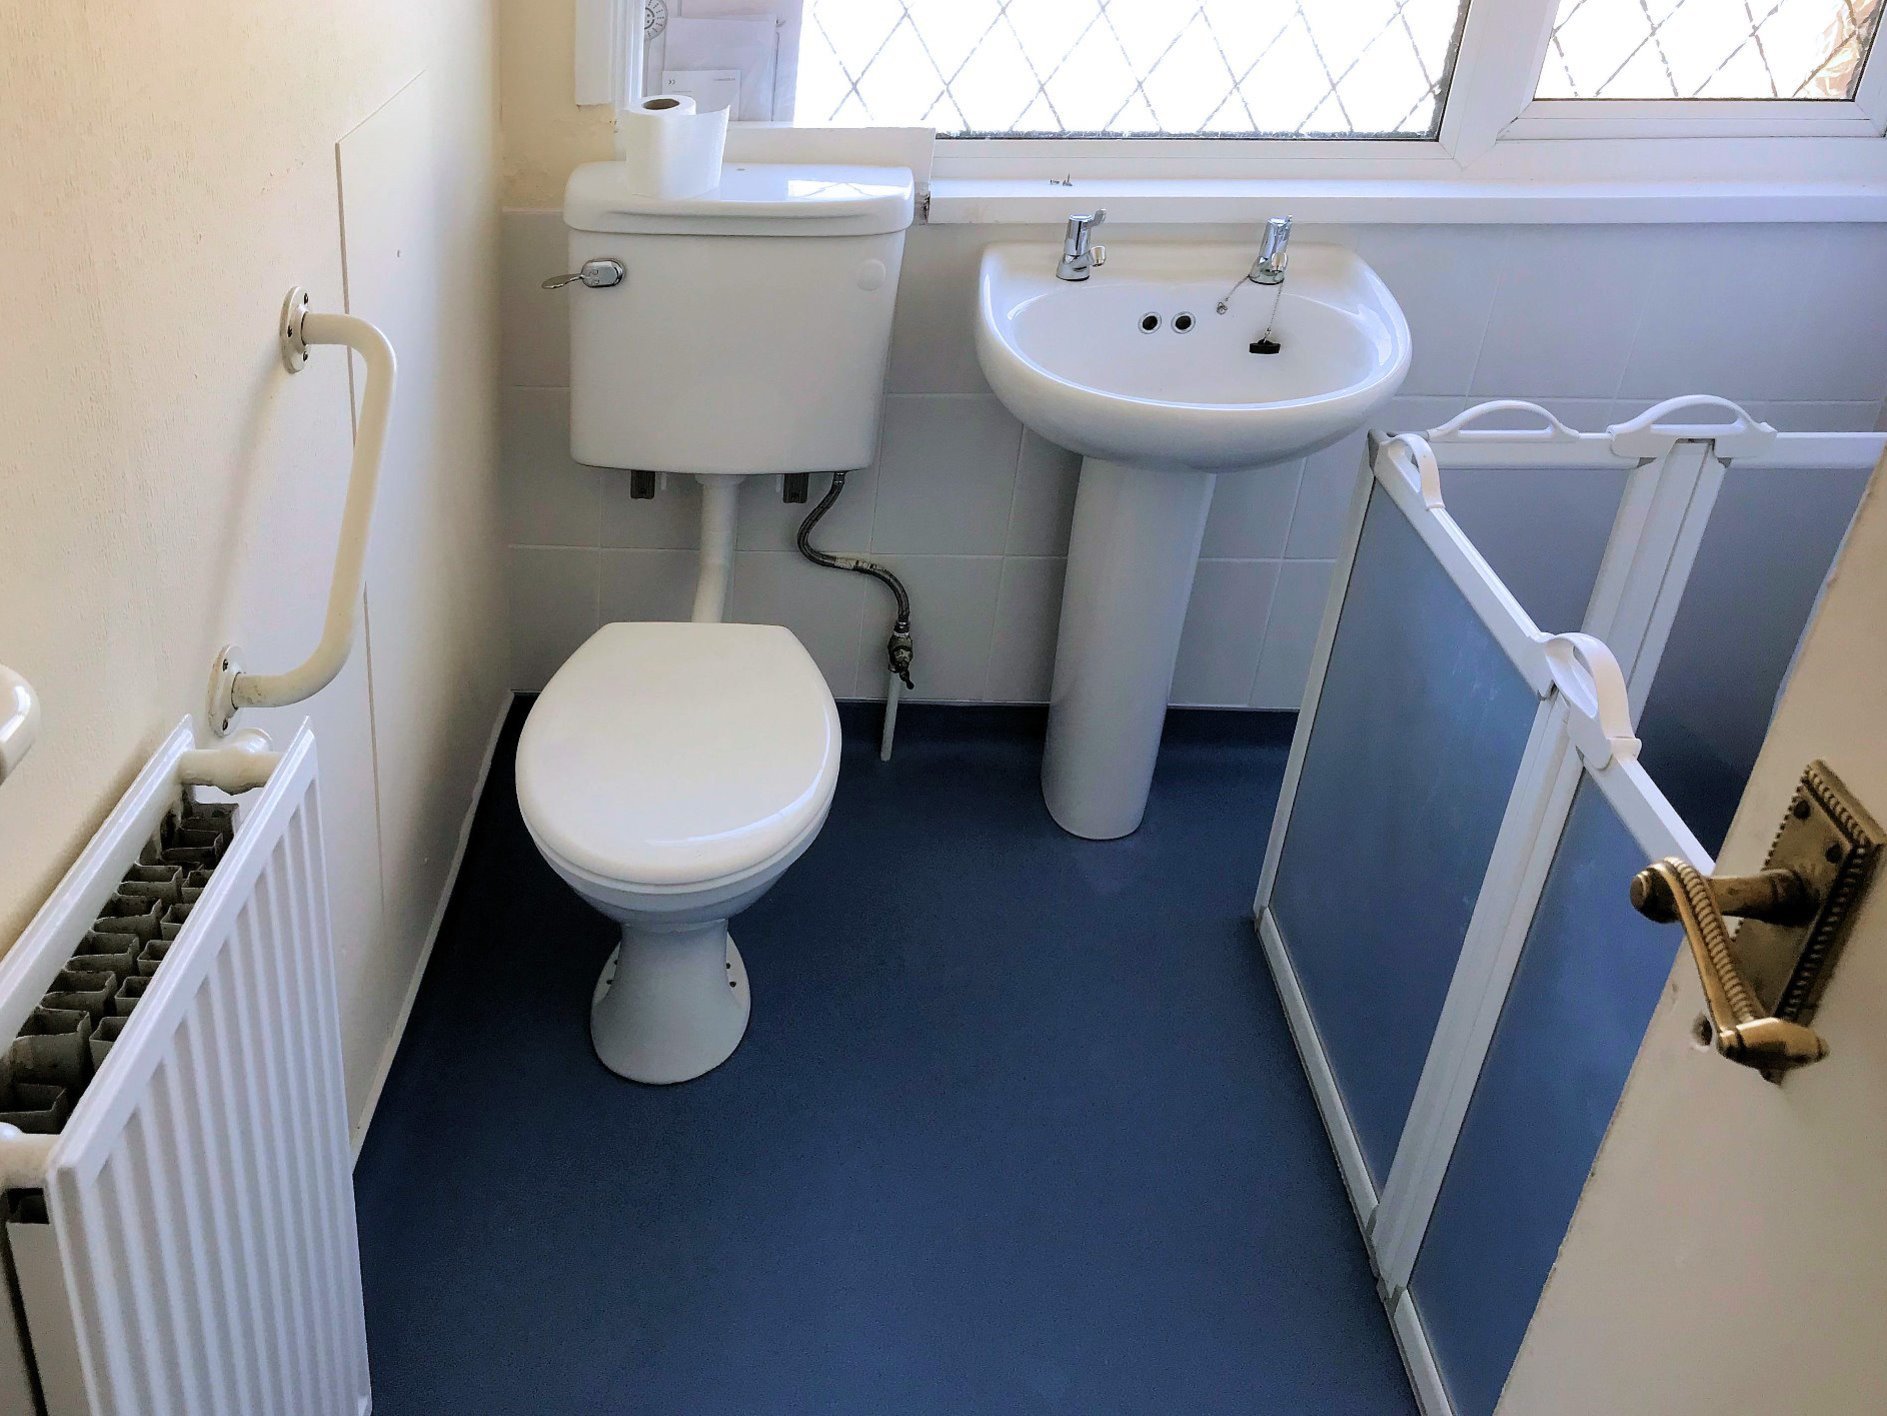 New bathroom suite fitted